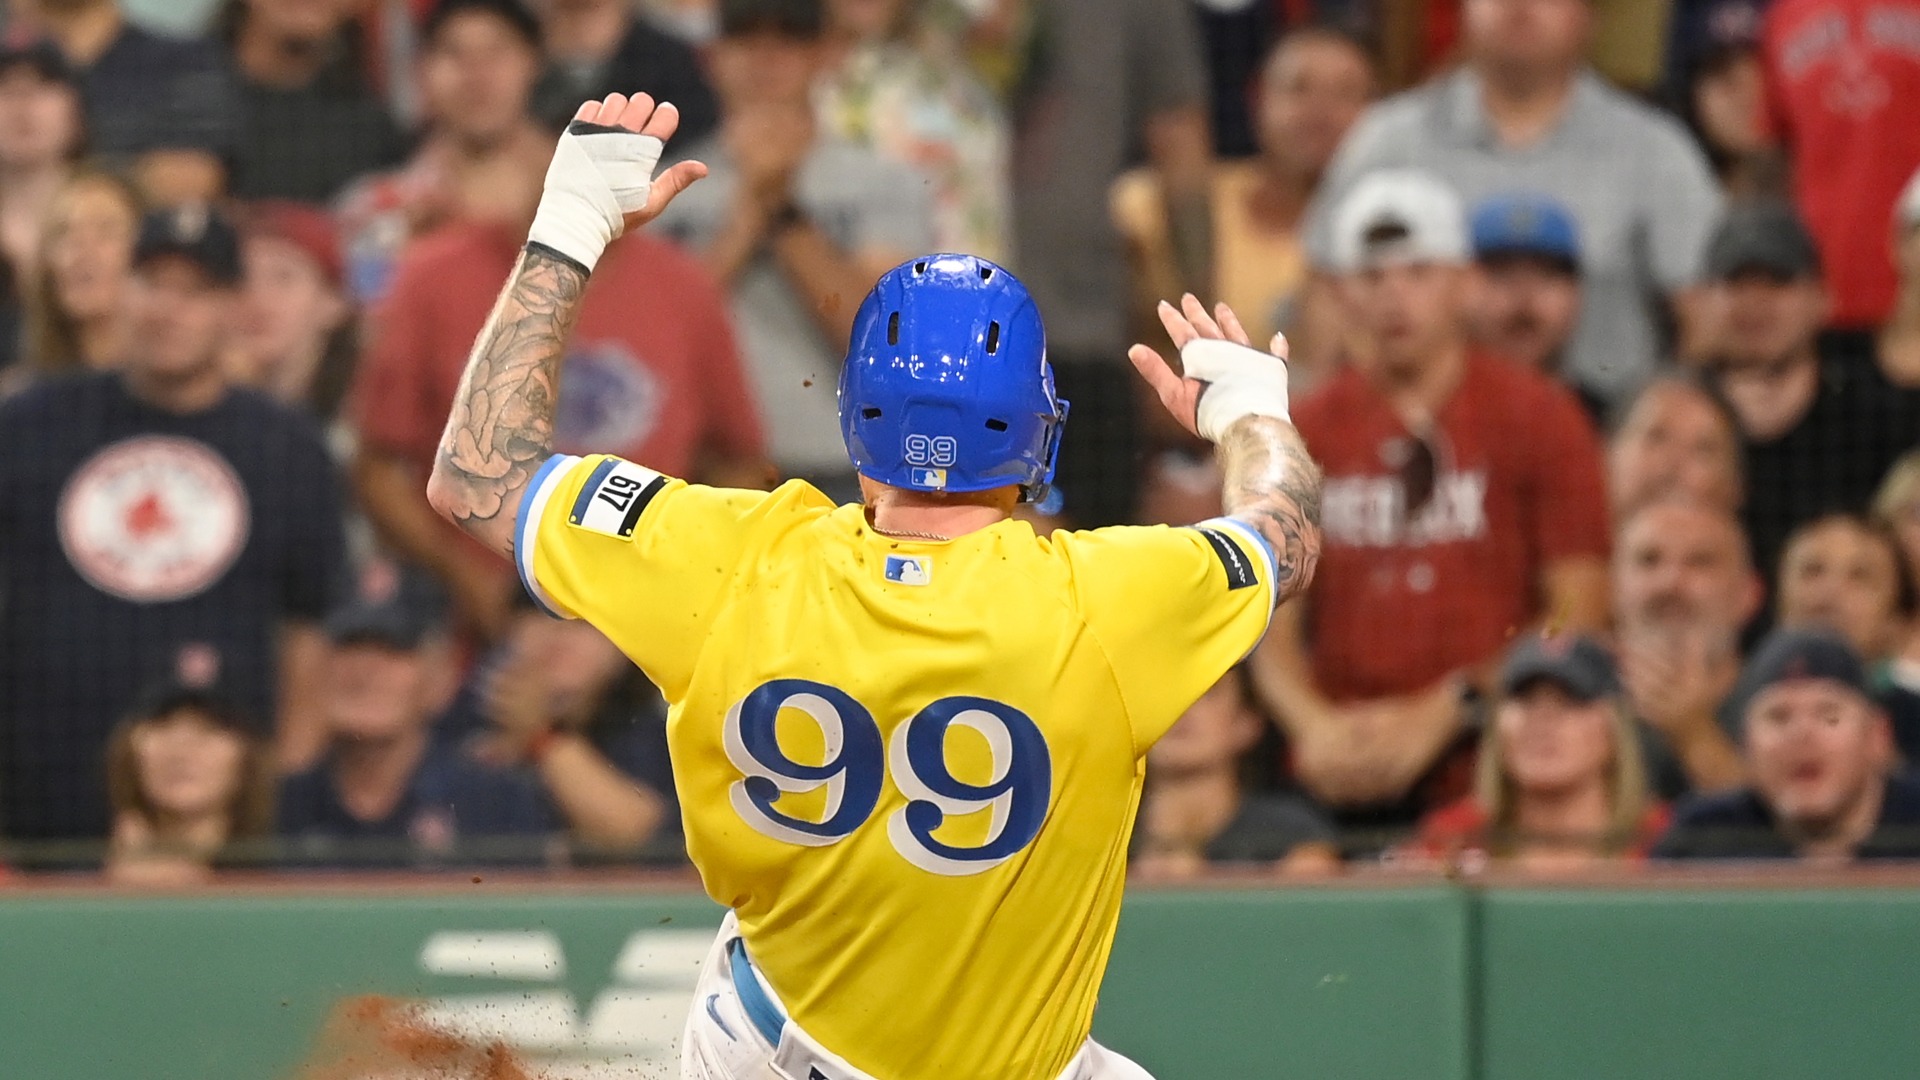 Alex Verdugo Notes 'Team Effort' Driving Red Sox To Victory Vs. Royals